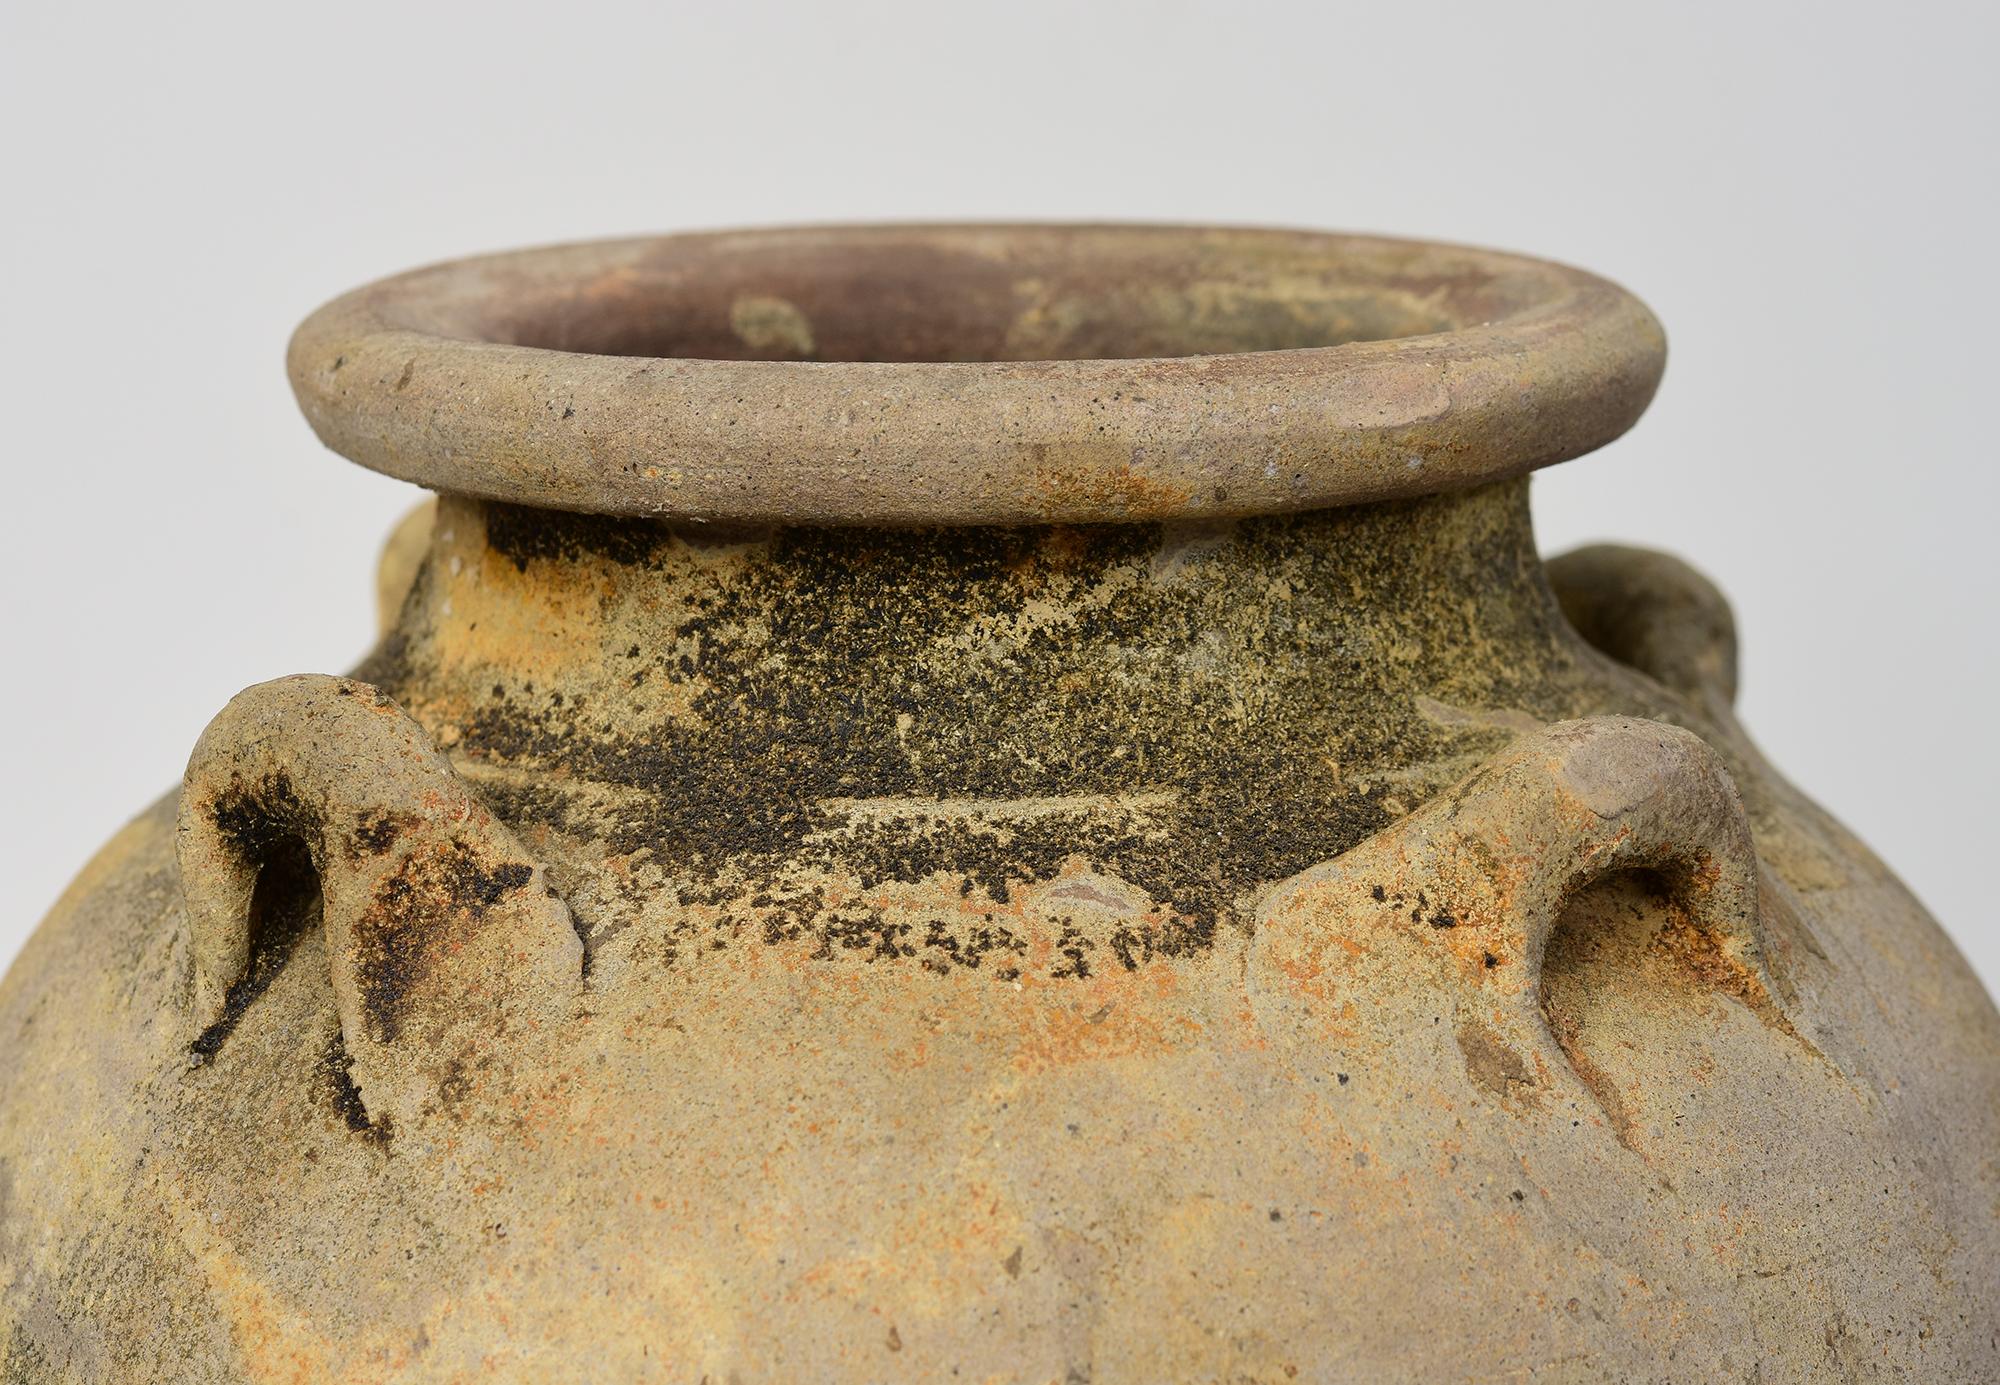 Antique Thai Sukhothai pottery jar.

Age: Thailand, Sukhothai Period, 14th - 16th Century
Size: Height 32.5 C.M. / Width 20 C.M.
Condition: Nice condition overall (some expected degradation due to its age).

100% Satisfaction and authenticity